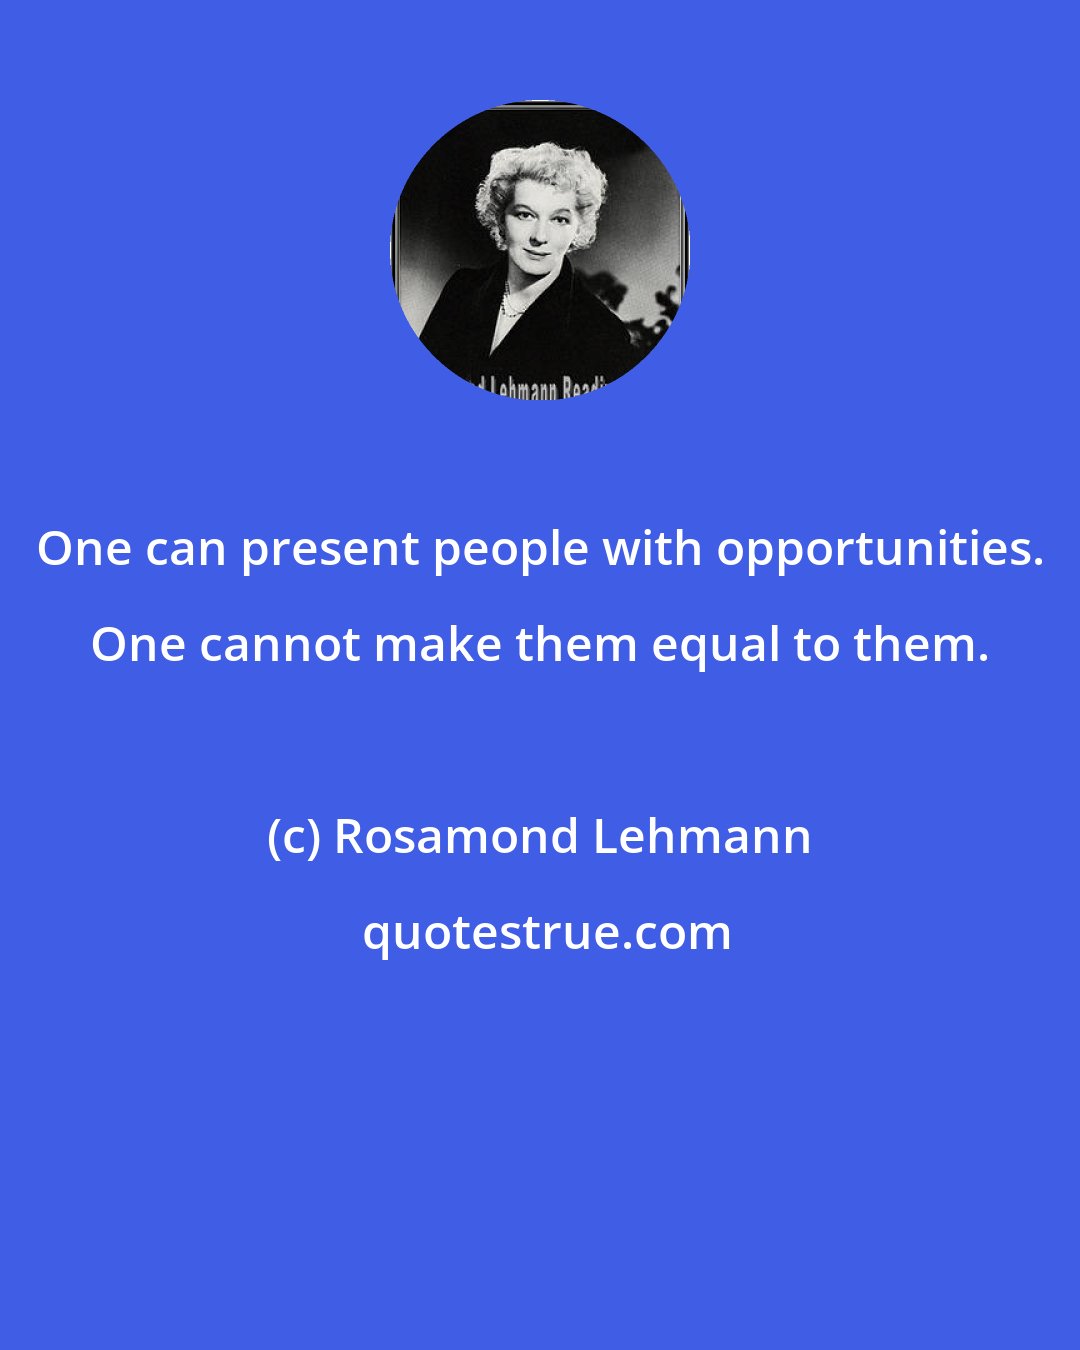 Rosamond Lehmann: One can present people with opportunities. One cannot make them equal to them.